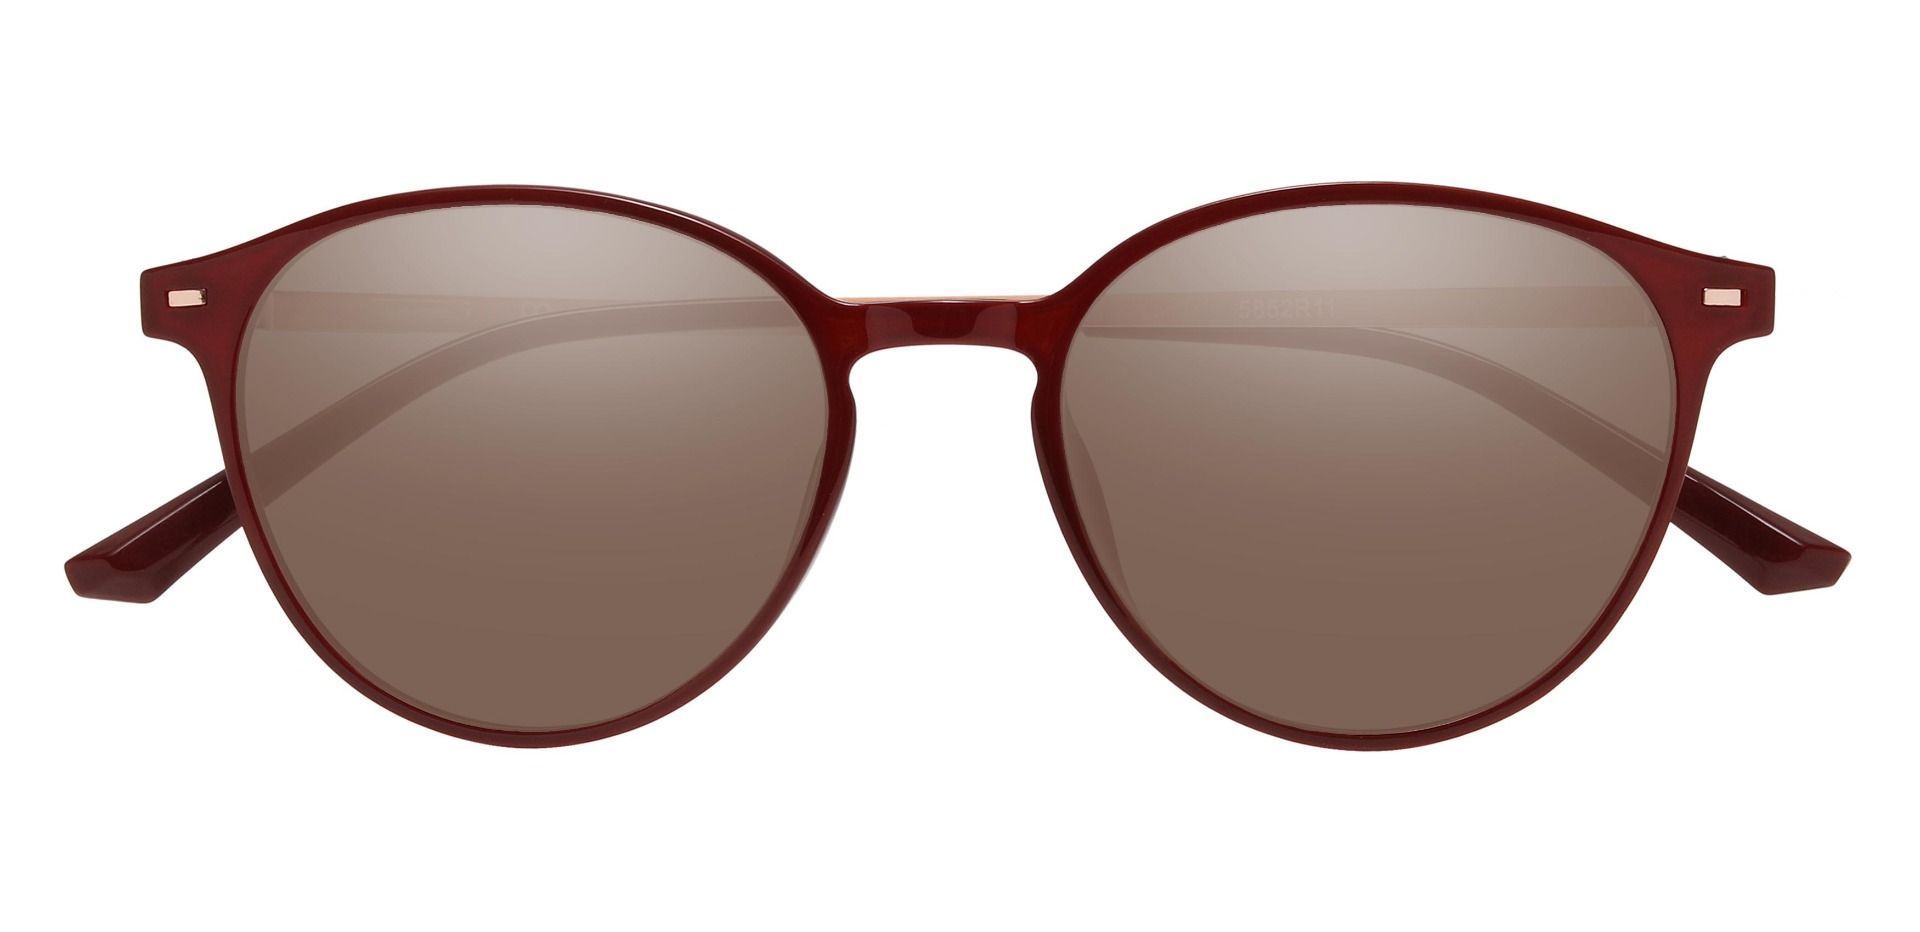 Springer Round Lined Bifocal Sunglasses - Red Frame With Brown Lenses